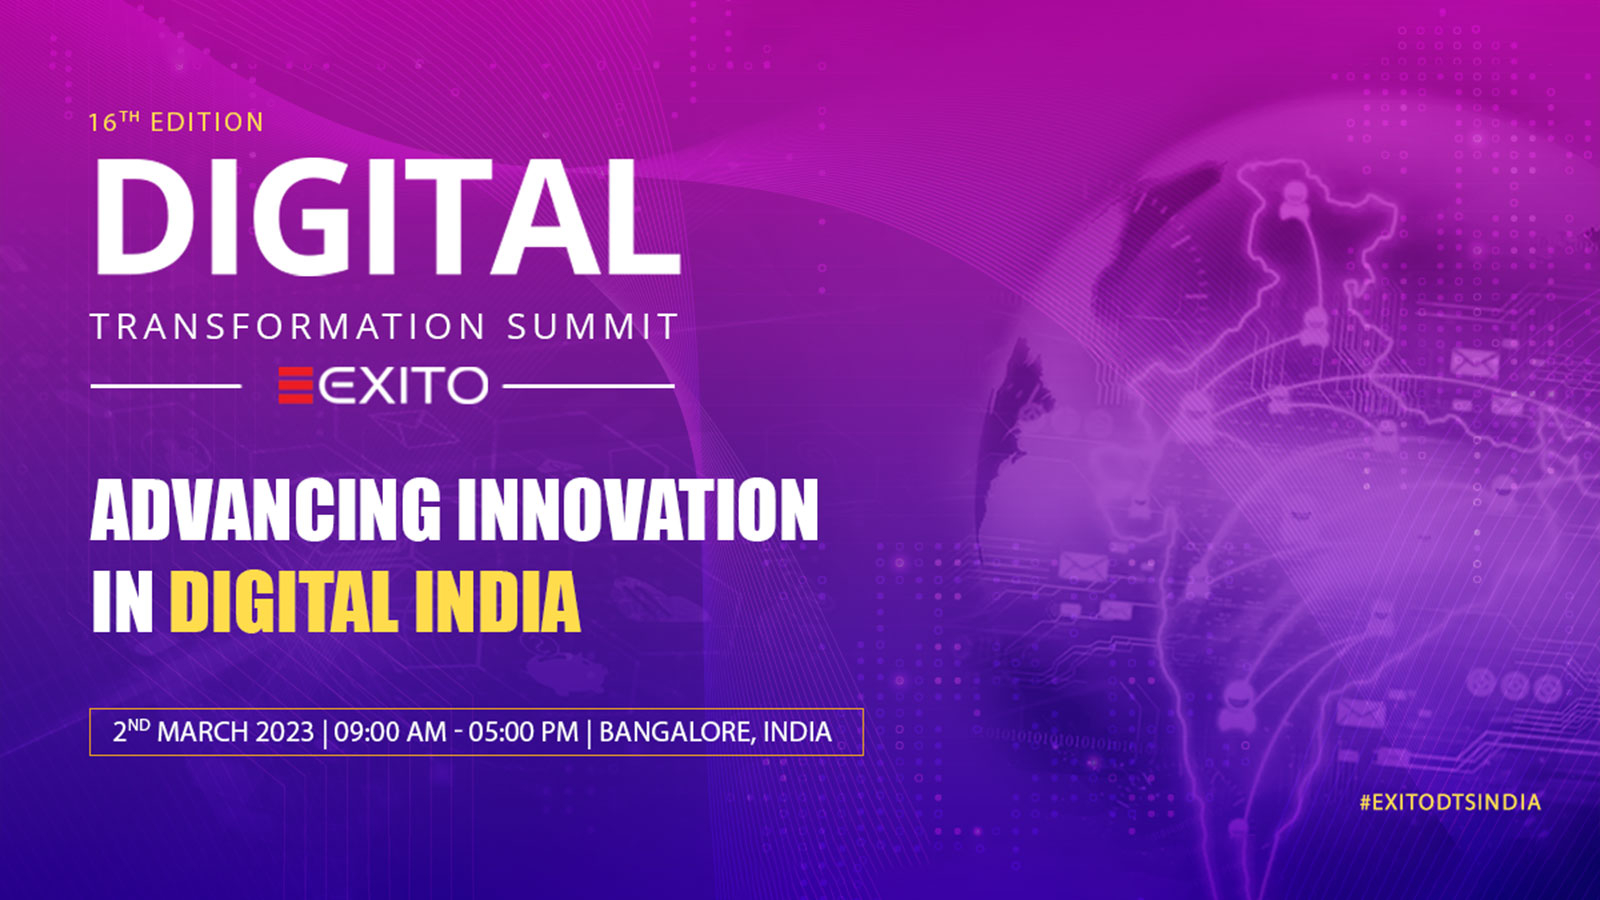 16th Edition of Digital Transformation Summit: India, Physical Conference on 2nd March 2023